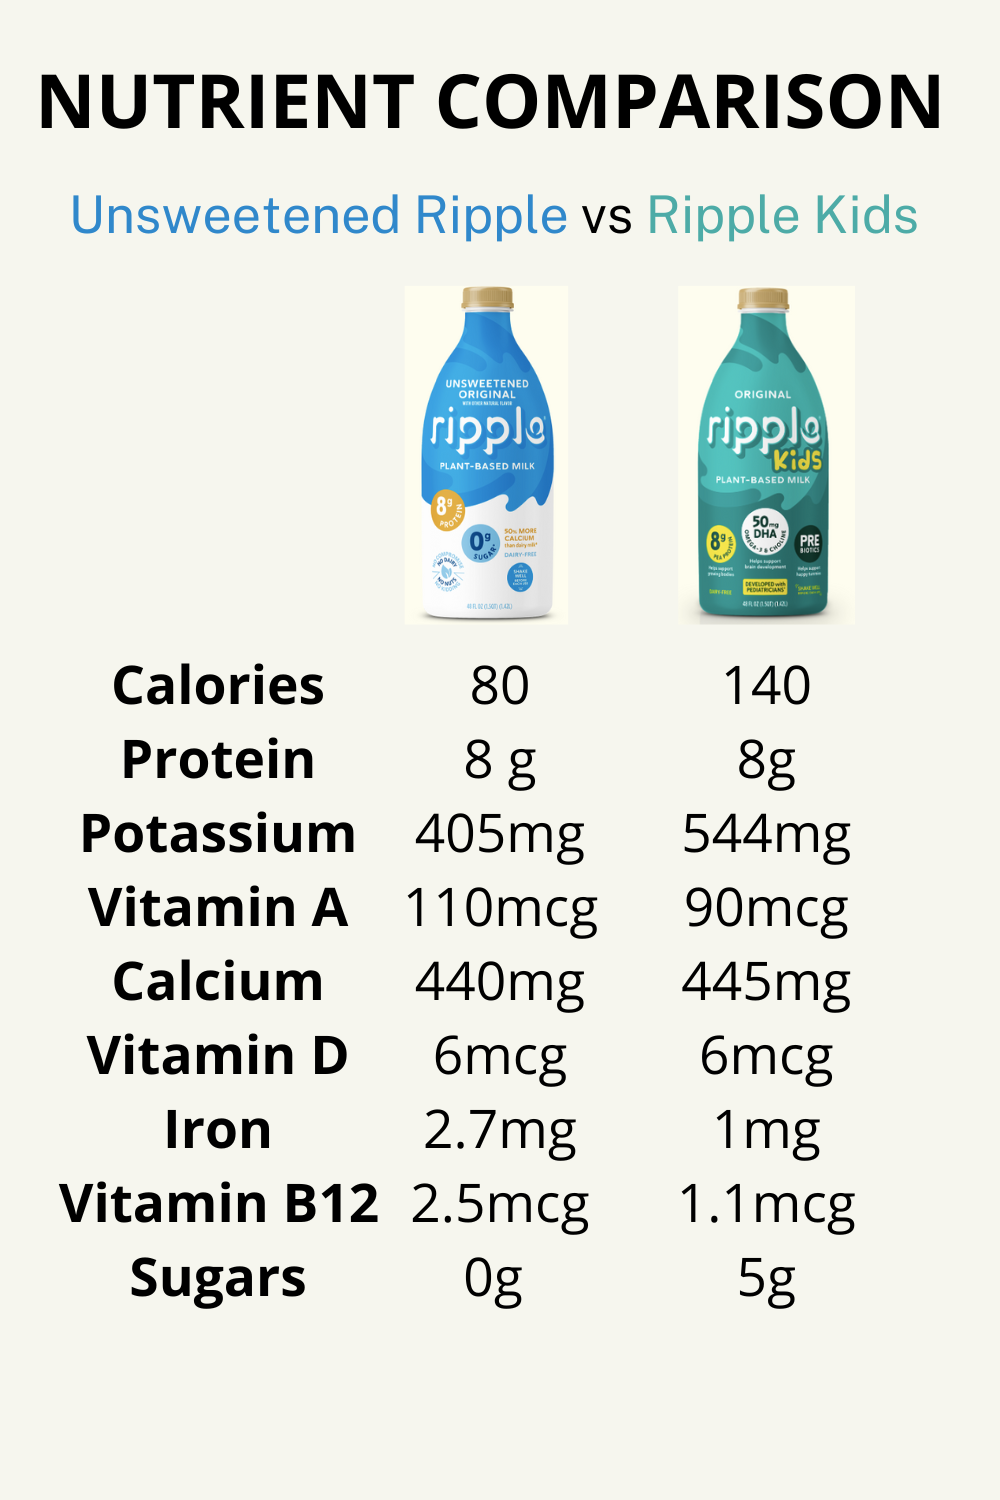 Ripple kids vs Ripple unsweetened original - May Babies | Forums | What to Expect